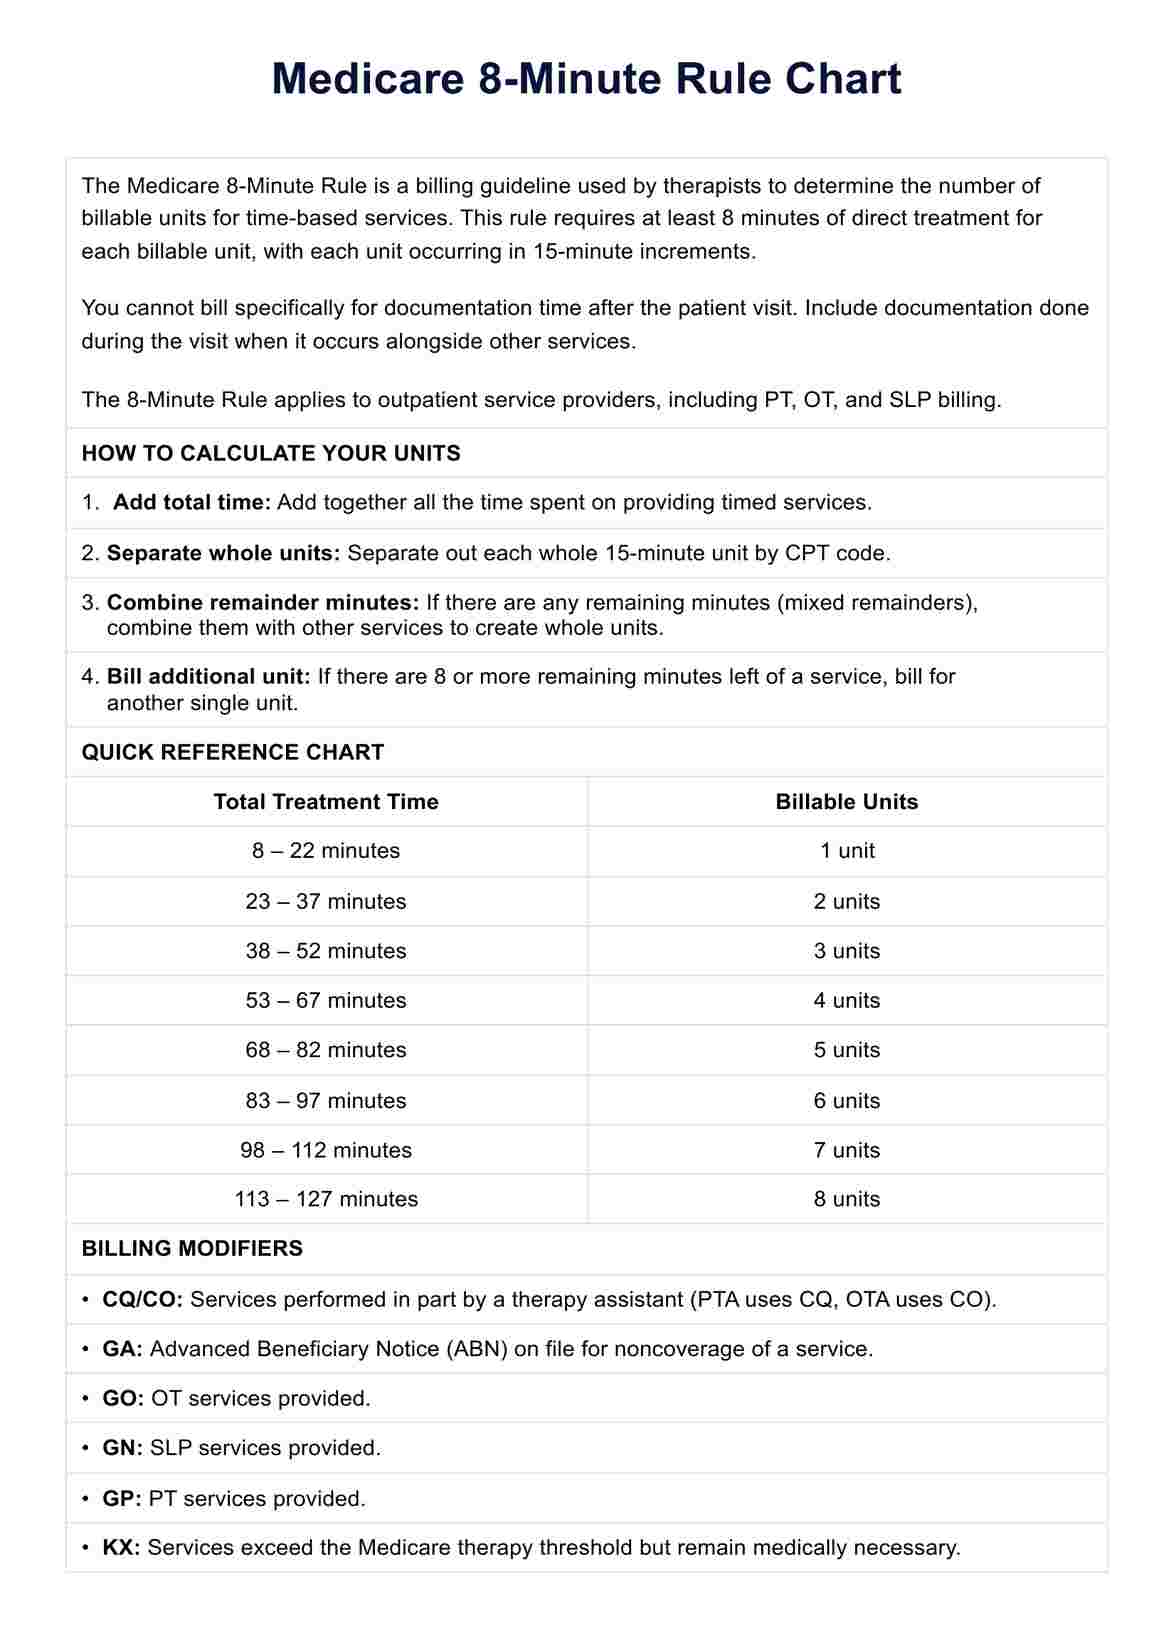 Medicare 8-minute Rule Chart PDF Example